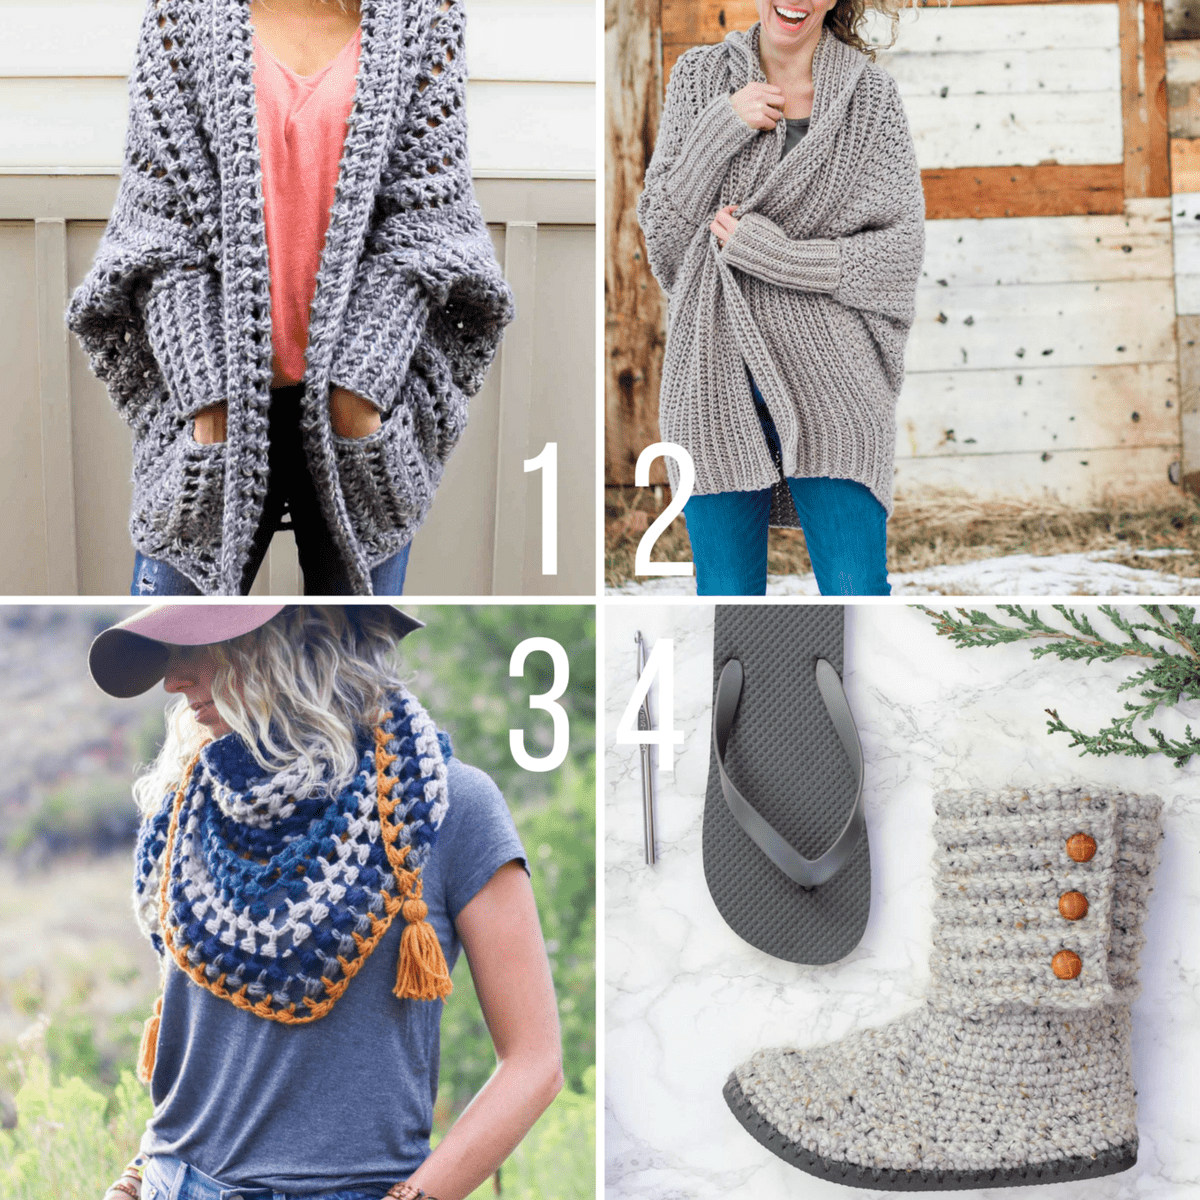 Free crochet patterns with video tutorials that feature Lion Brand yarn. Patterns include cardigans, sweaters, a triangle scarf and crochet boots made with flip flops.